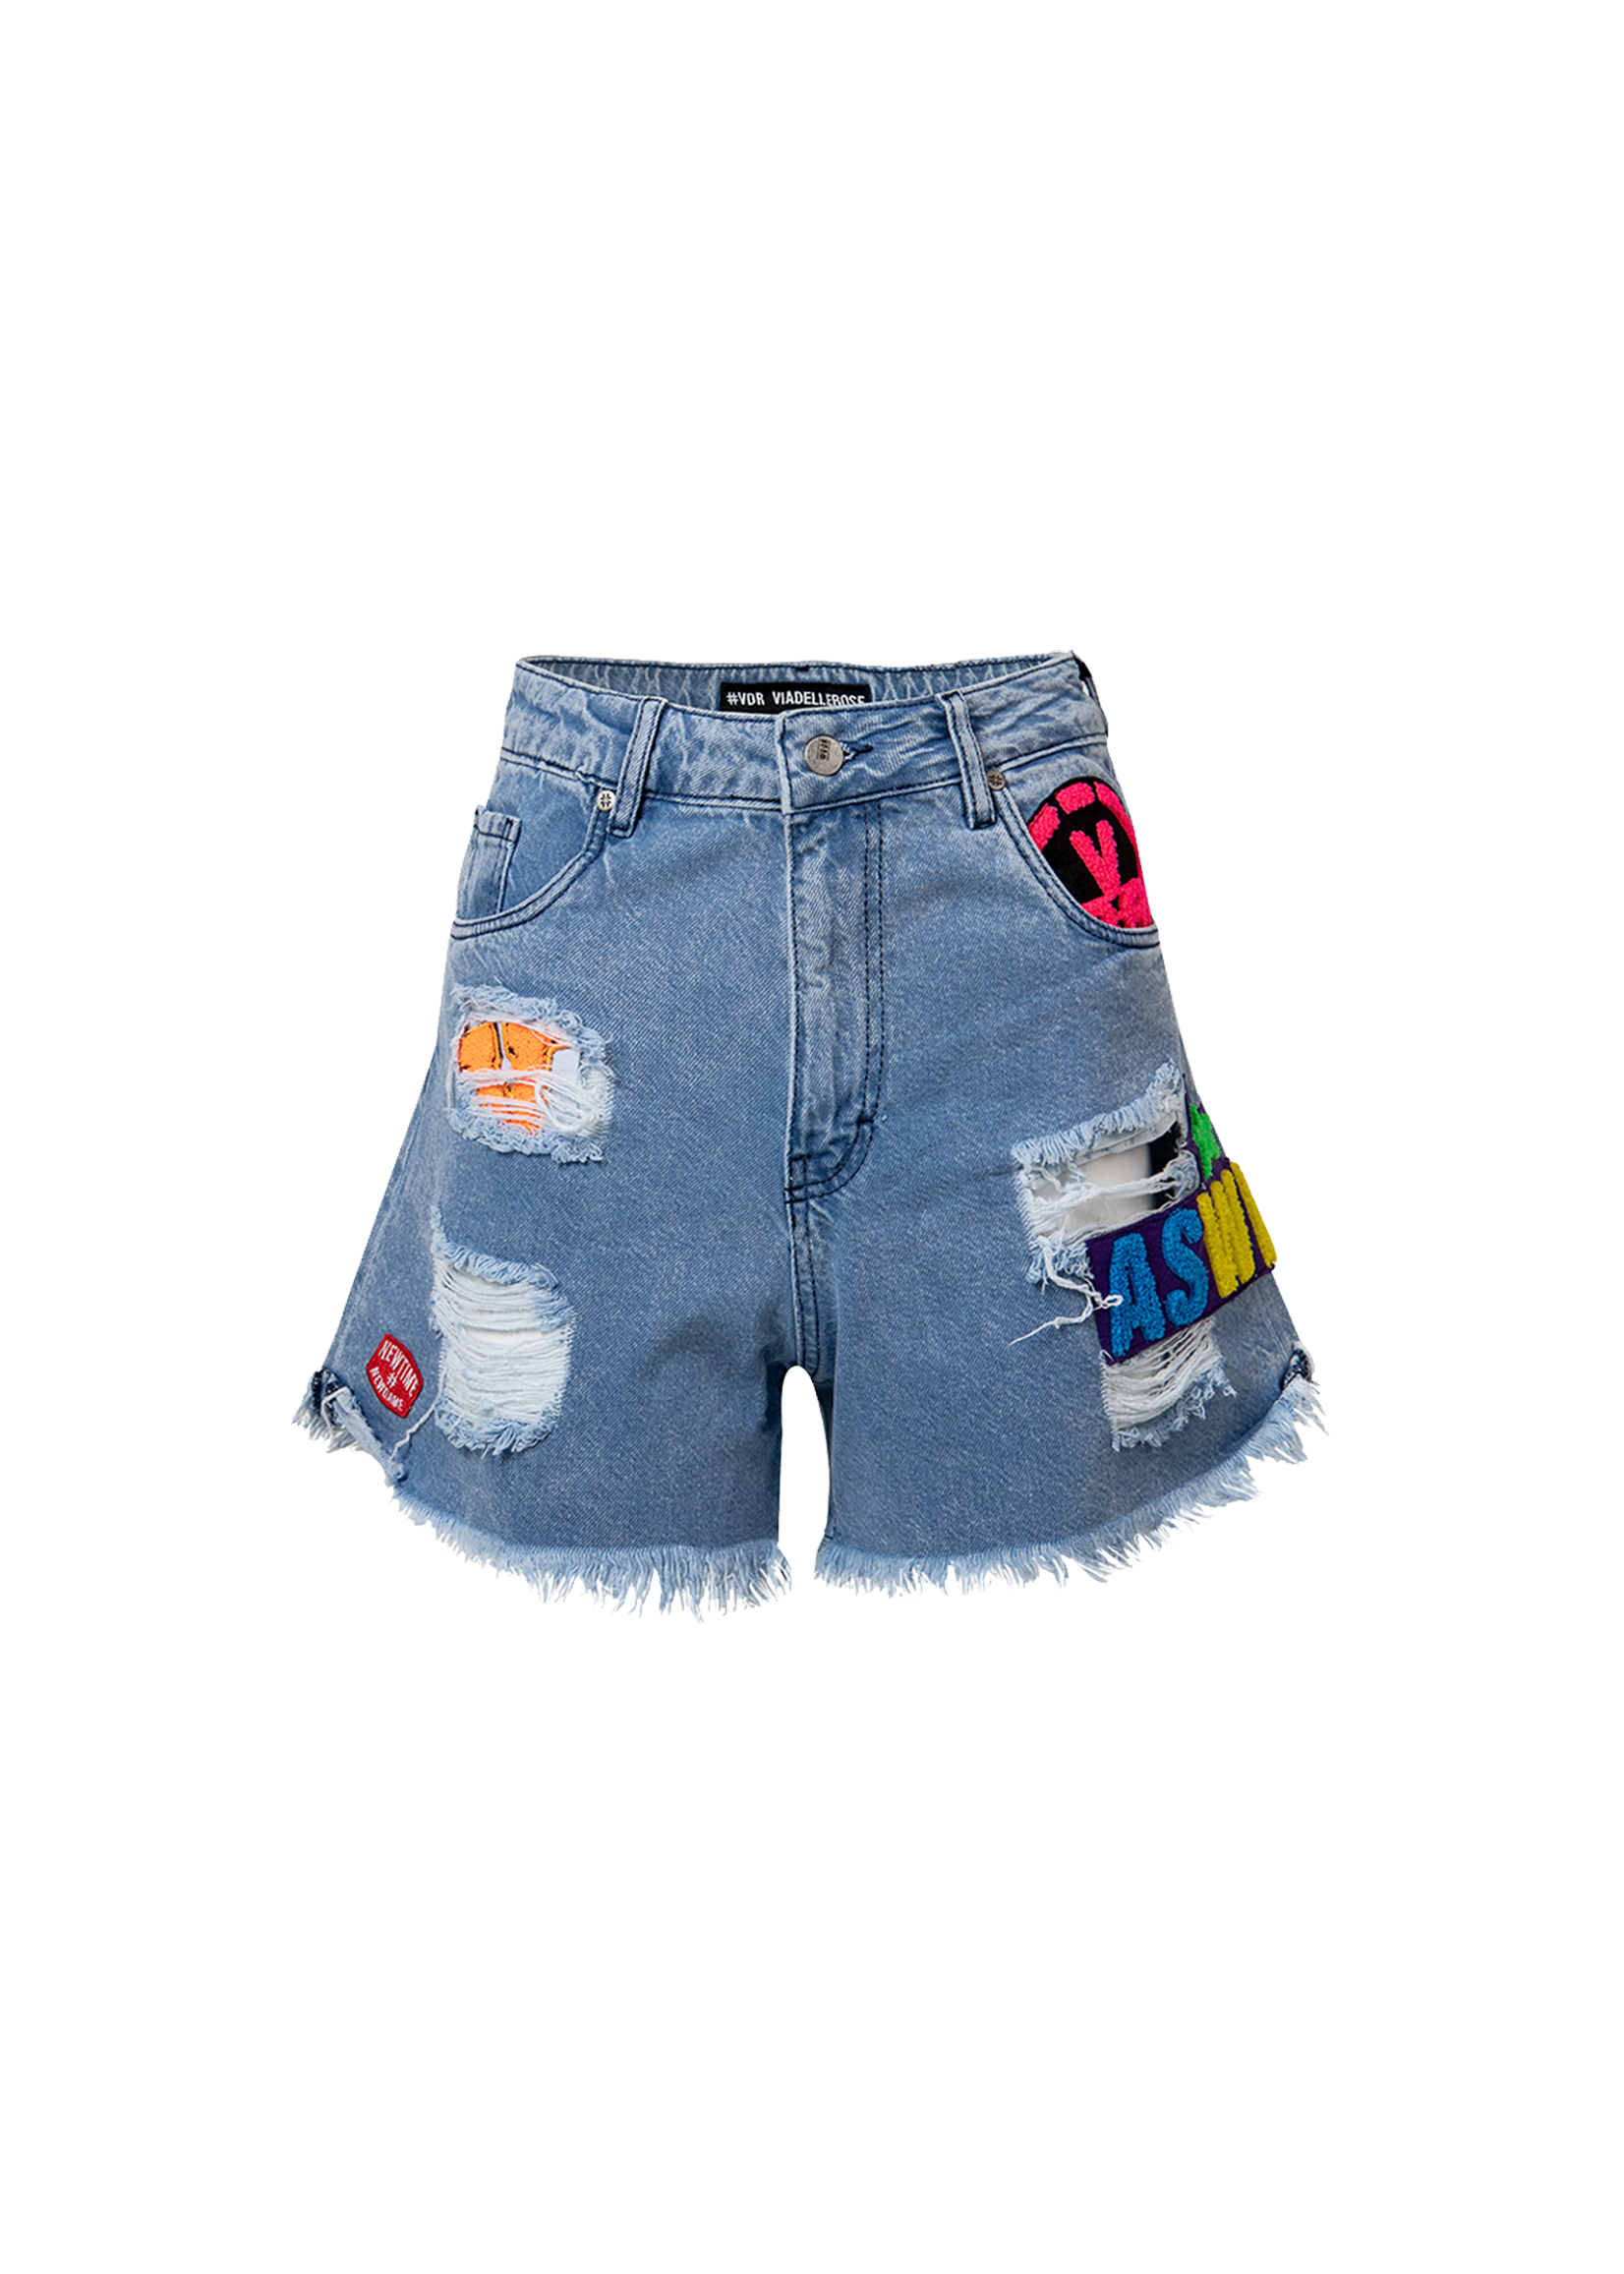 VDR DISTRESSED PATCH SHORTS 9459